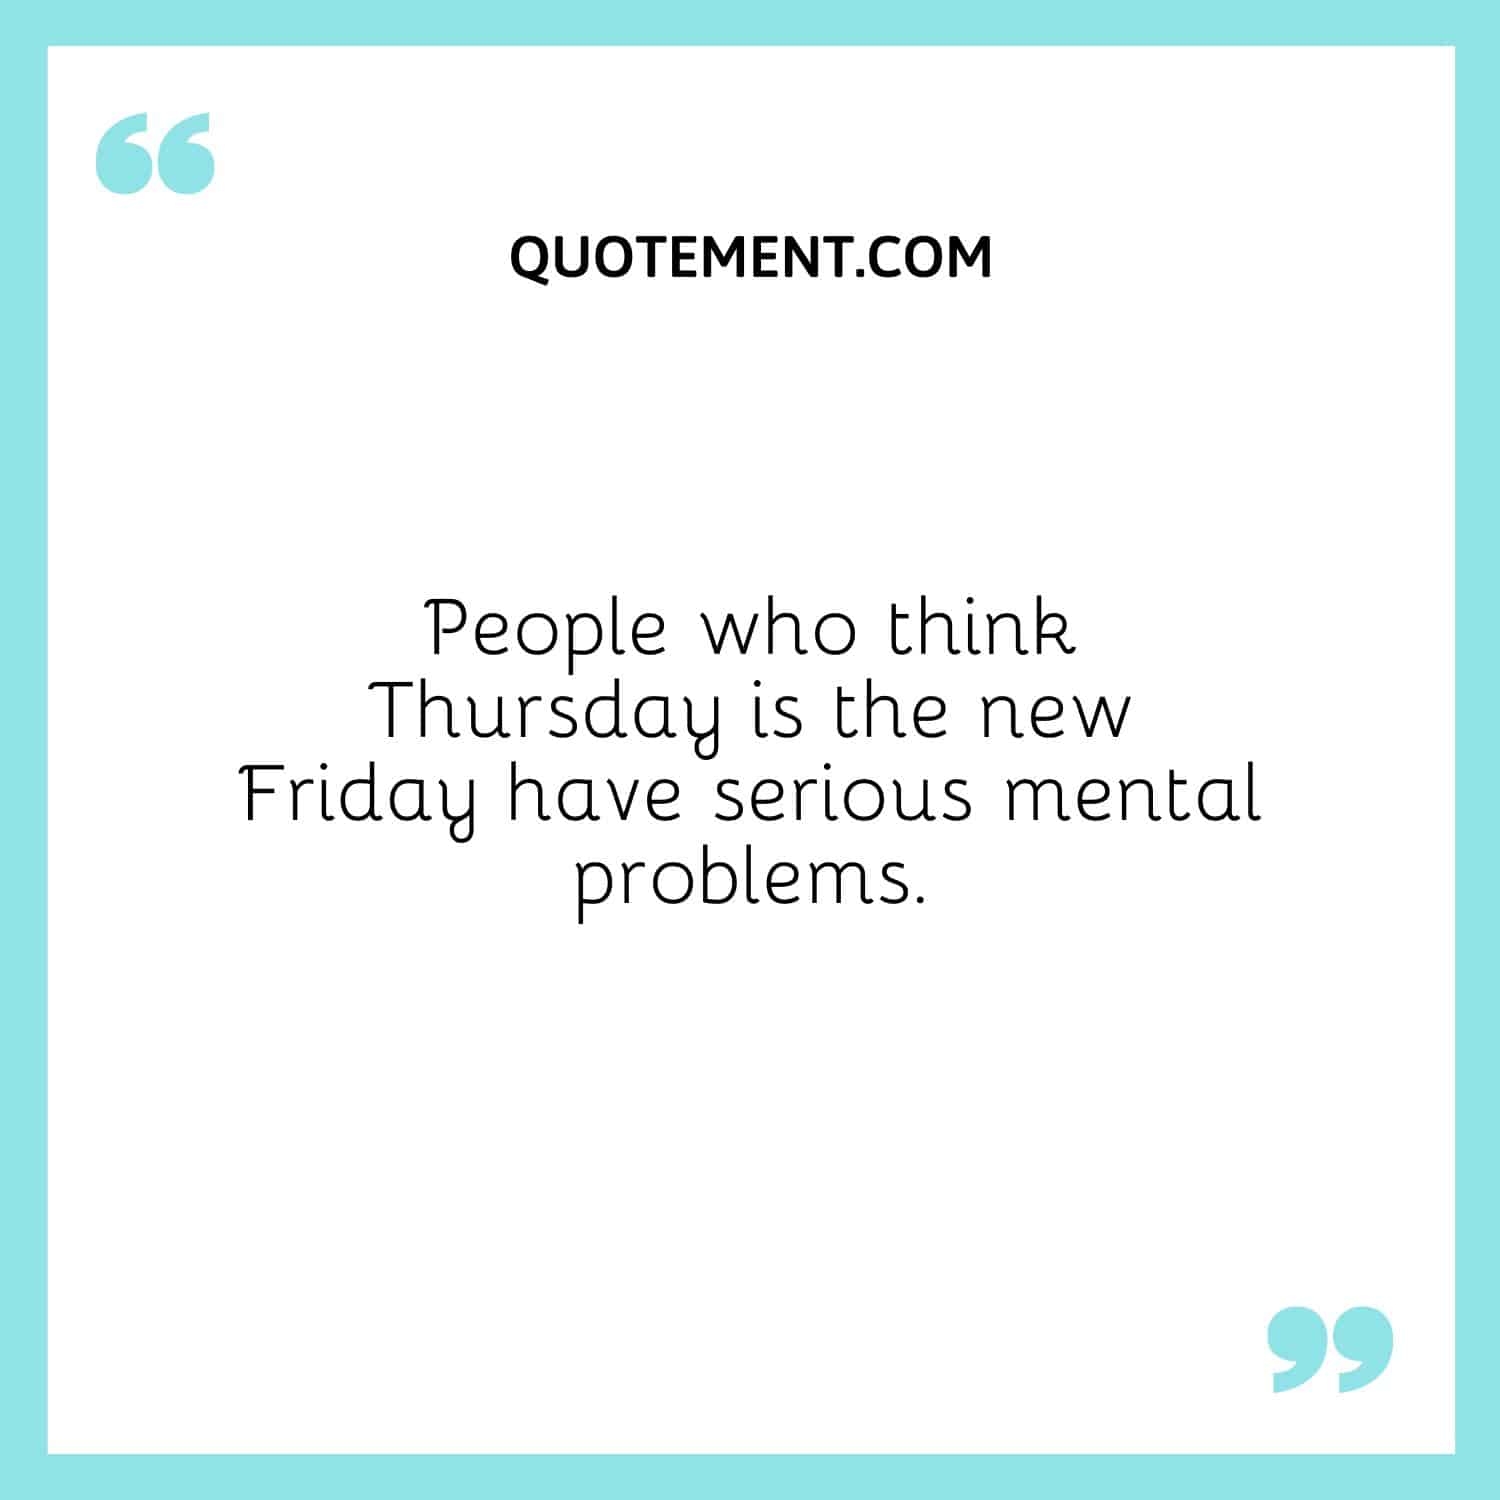 People who think Thursday is the new Friday have serious mental problems